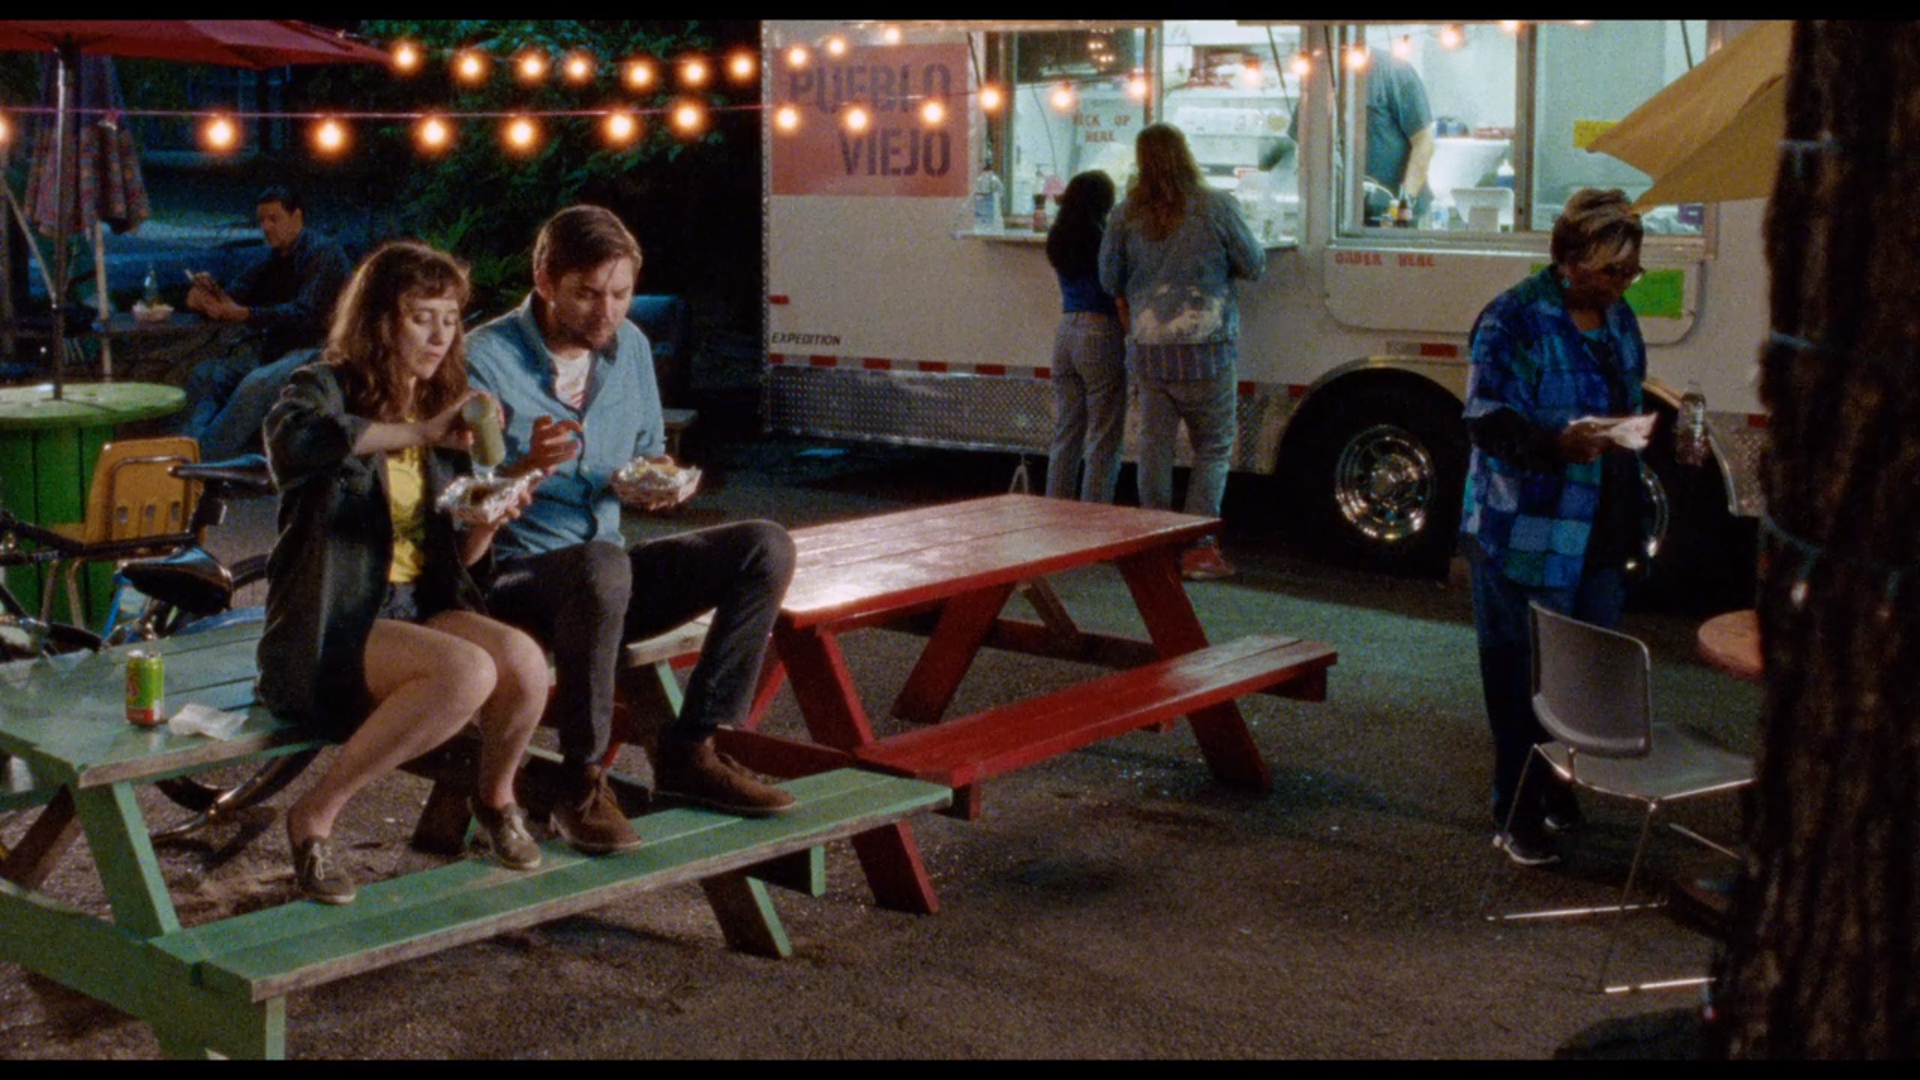 A man and woman sit next to each other on top of a picnic table, eating tacos from a taco truck parked in the background.